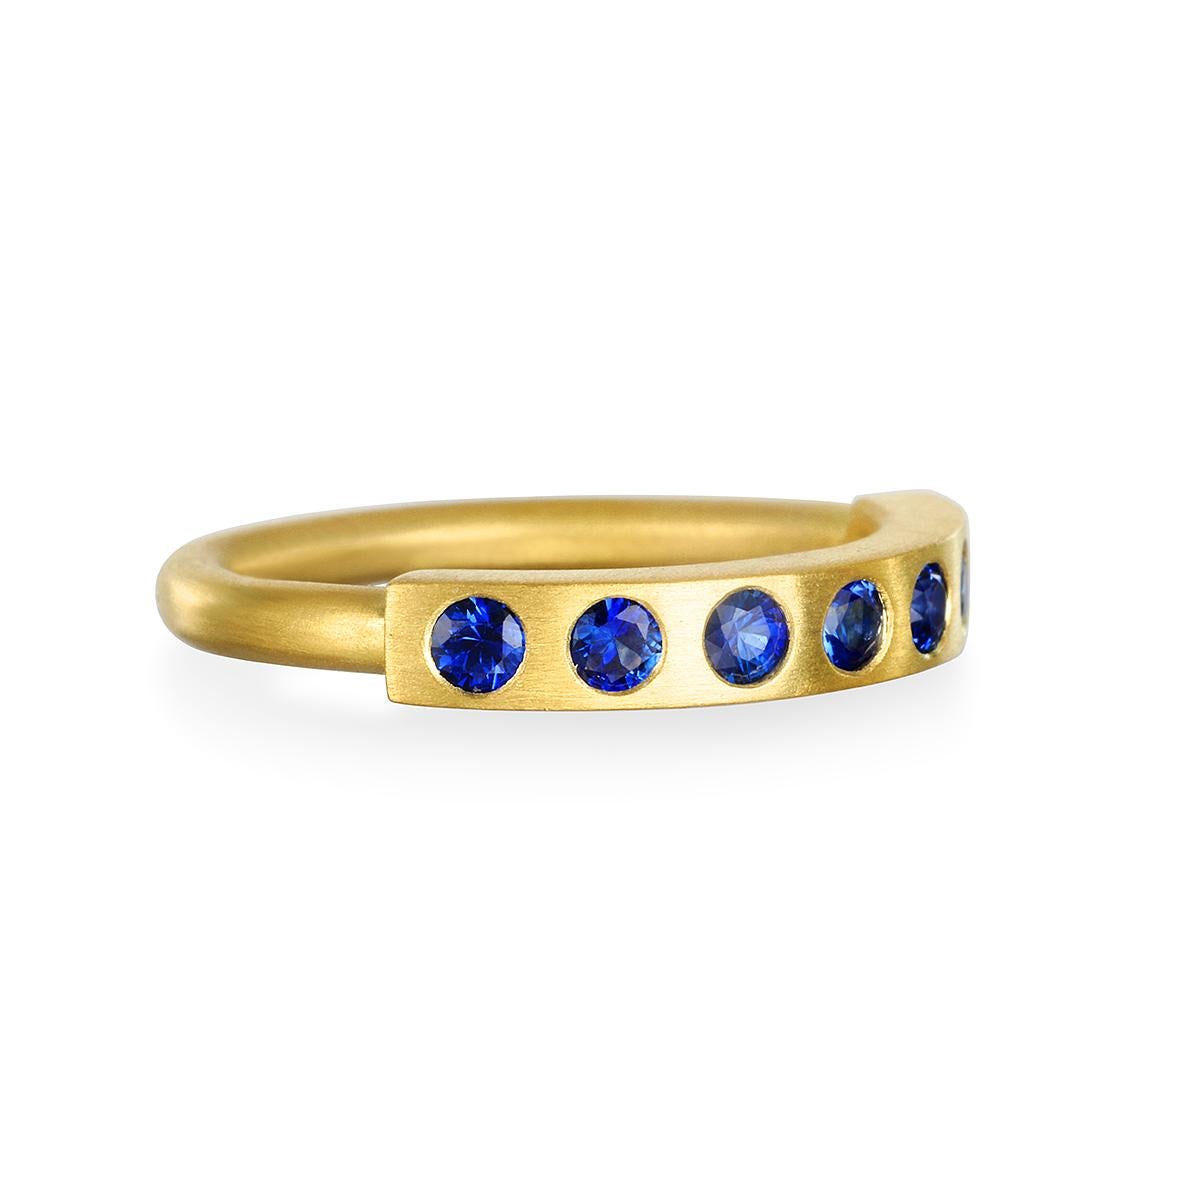 Blue Sapphire - Brilliant, Happy, and Stackable!

Faye Kim's 18 Karat Gold Blue Sapphire Handmade Burnished Bar Ring can be worn alone or mixed and matched with other rings to brighten up your everyday style and add sparkle to your wardrobe. Perfect